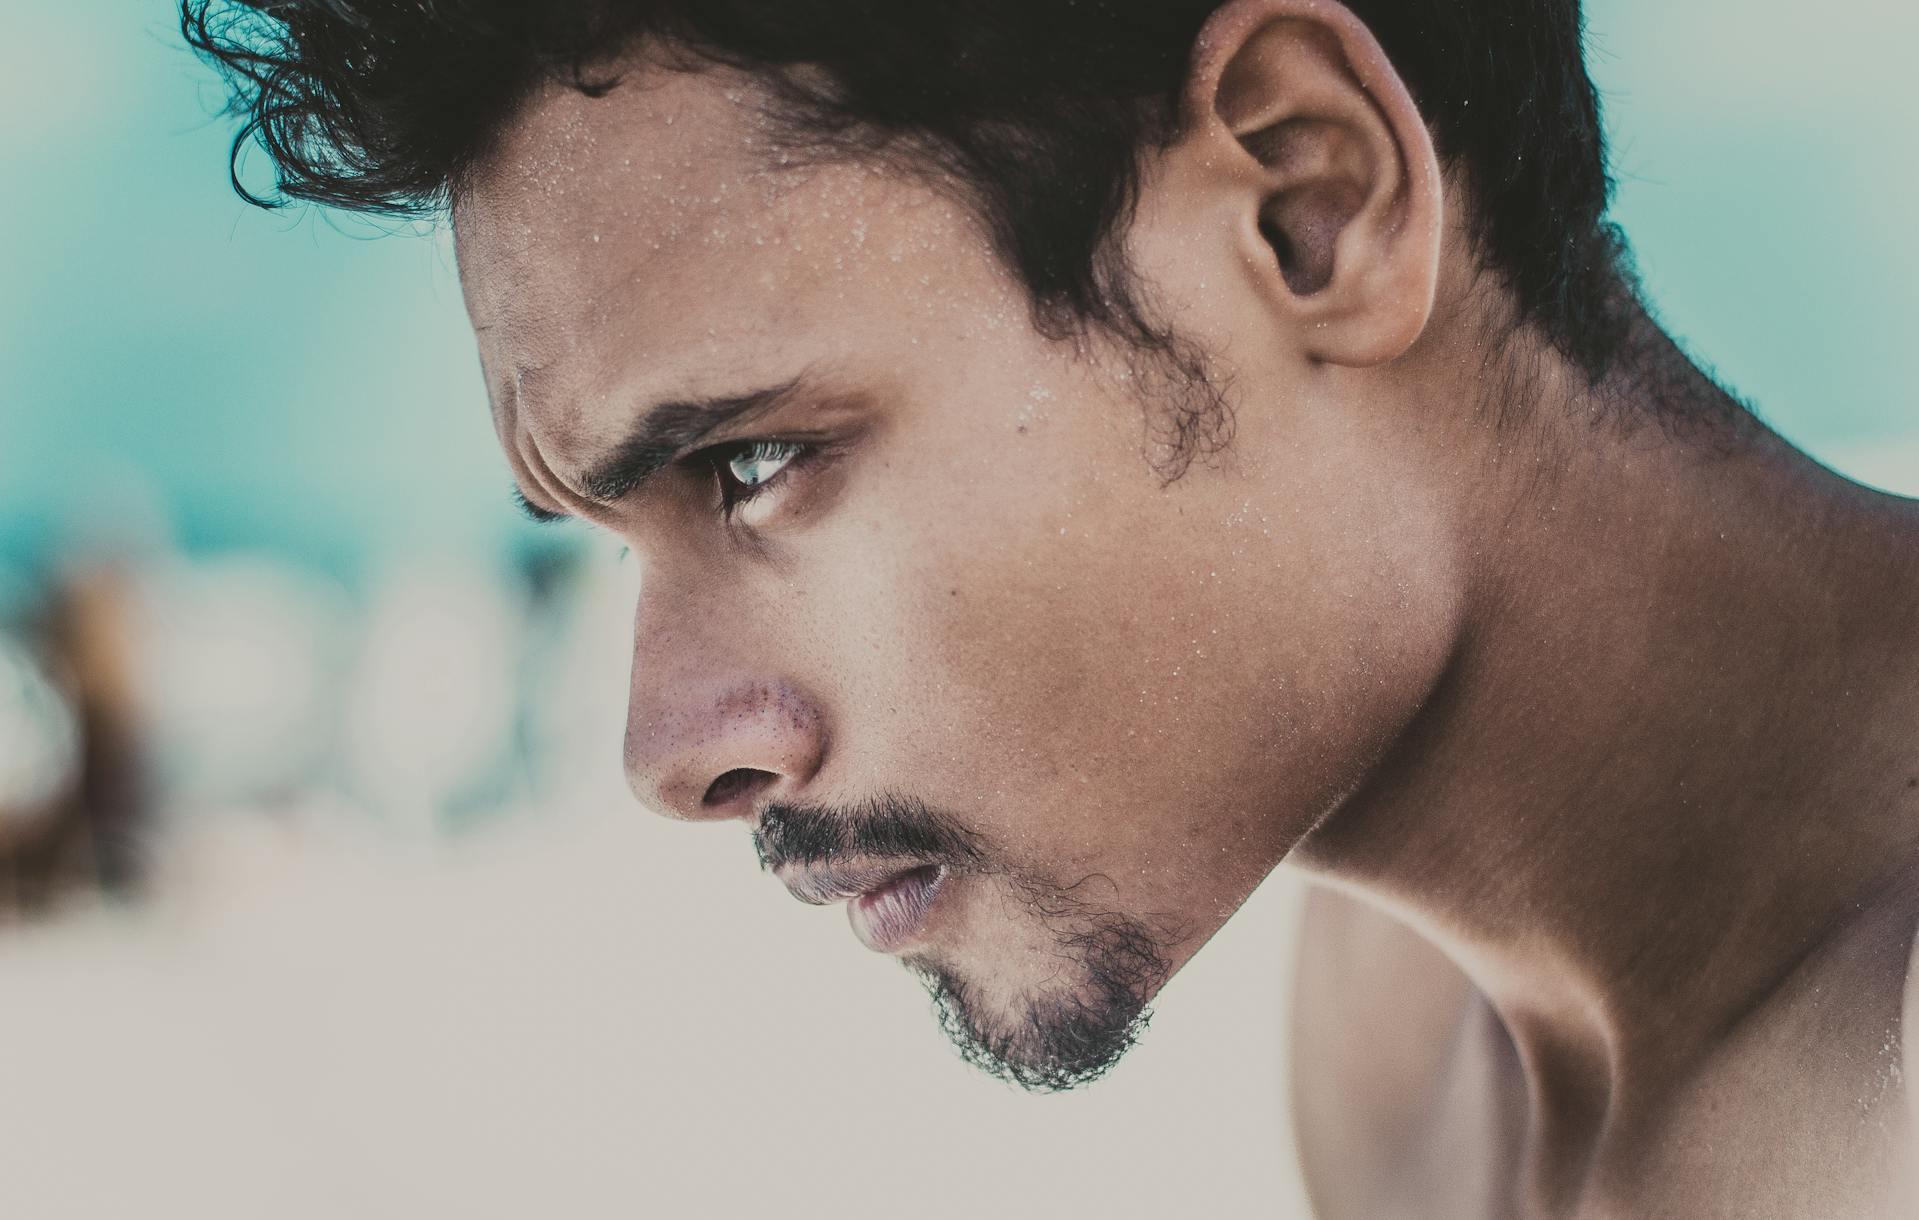 A side profile of an angry man | Source: Pexels